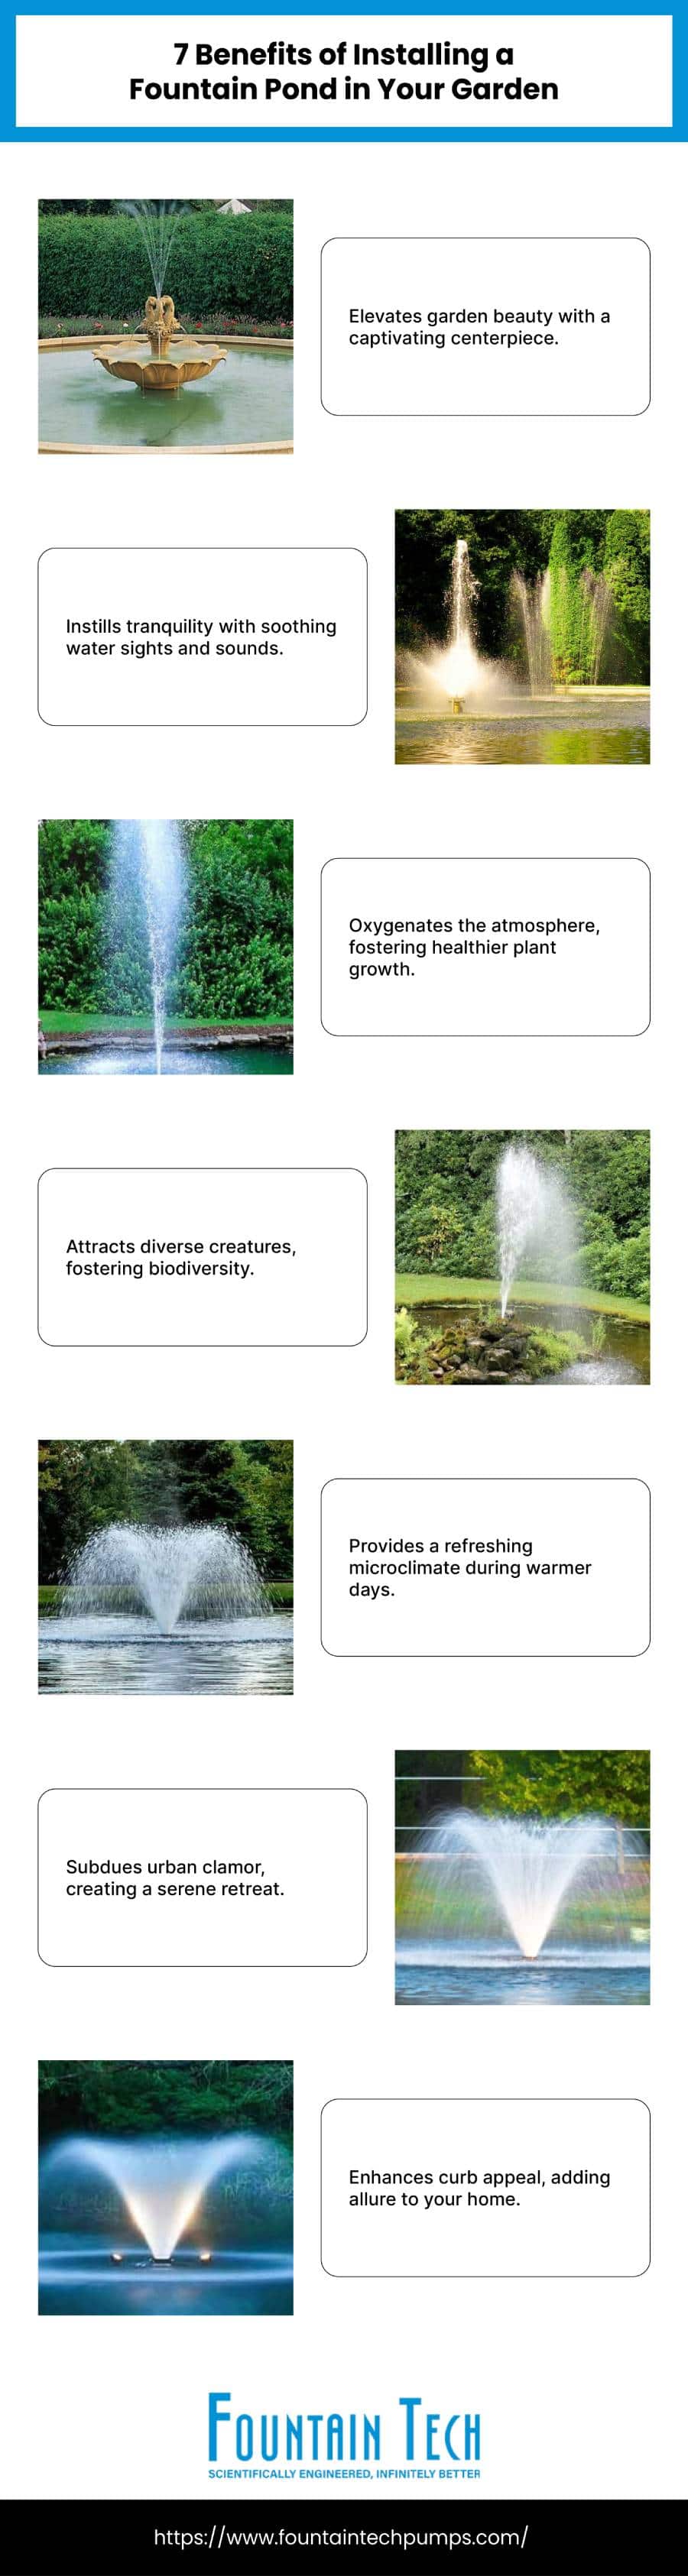 7 Benefits of Installing a Fountain Pond in Your Garden